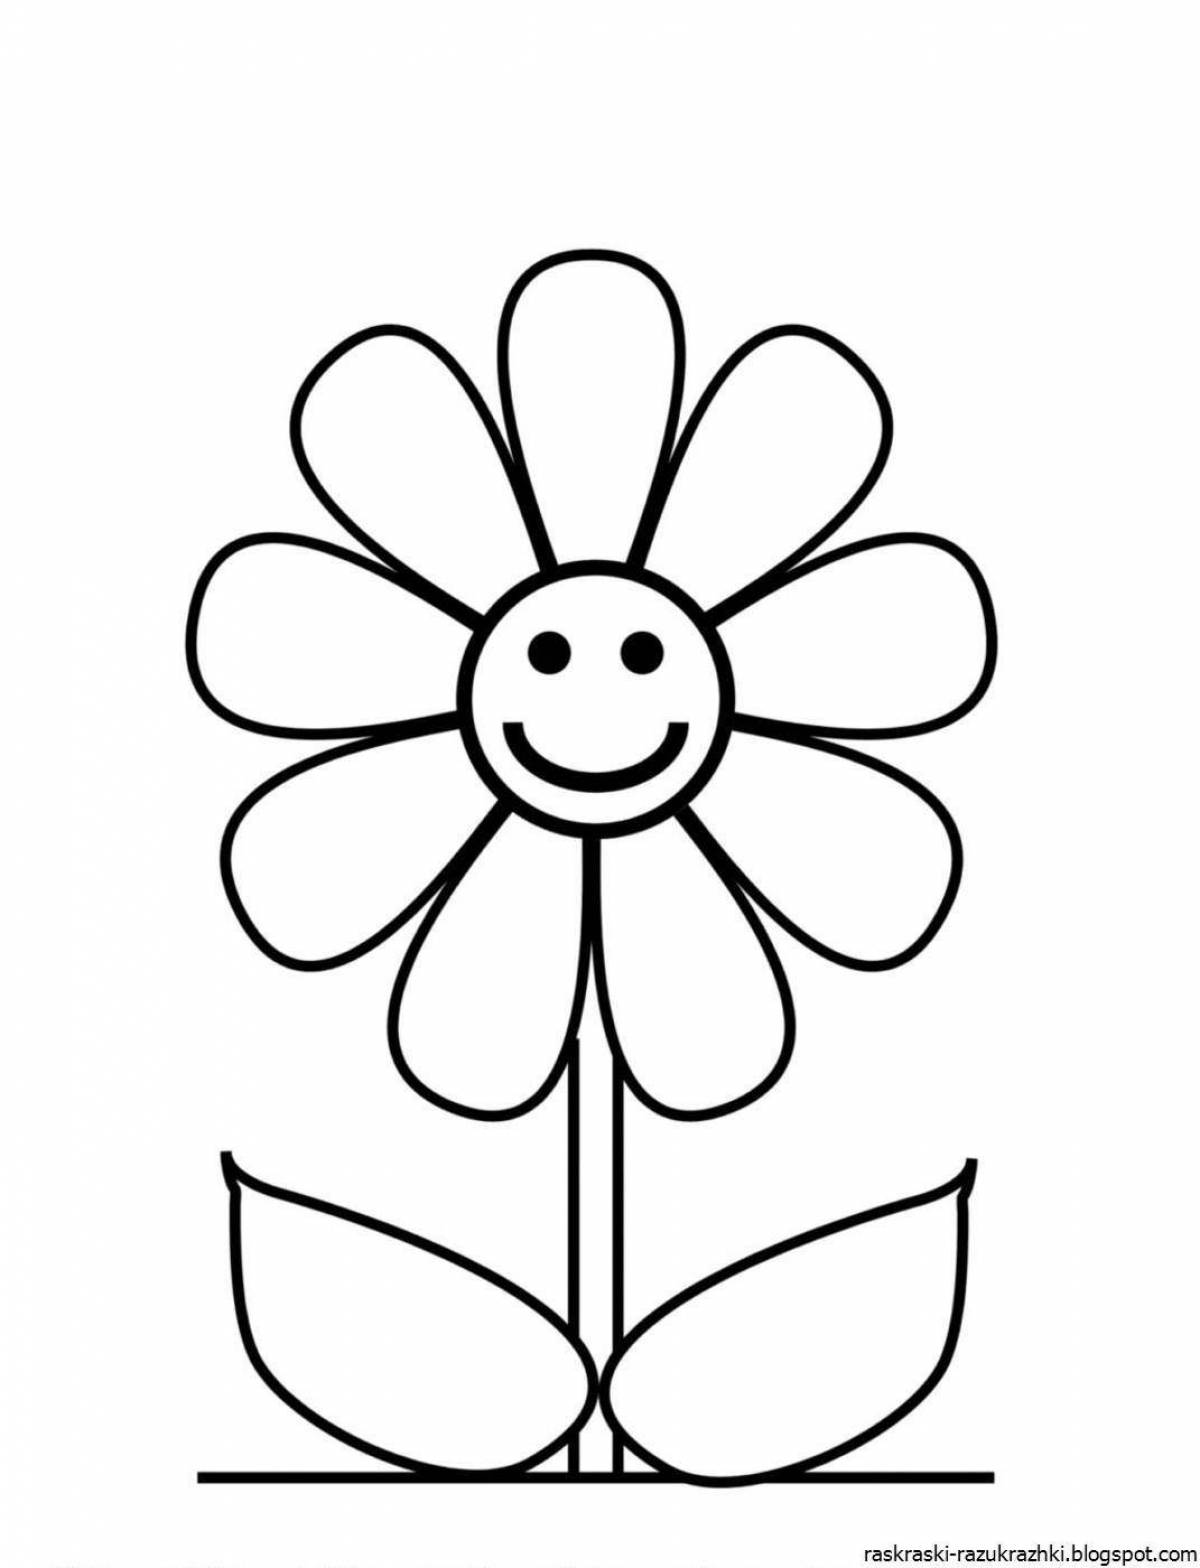 Cute flower coloring book for 2-3 year olds